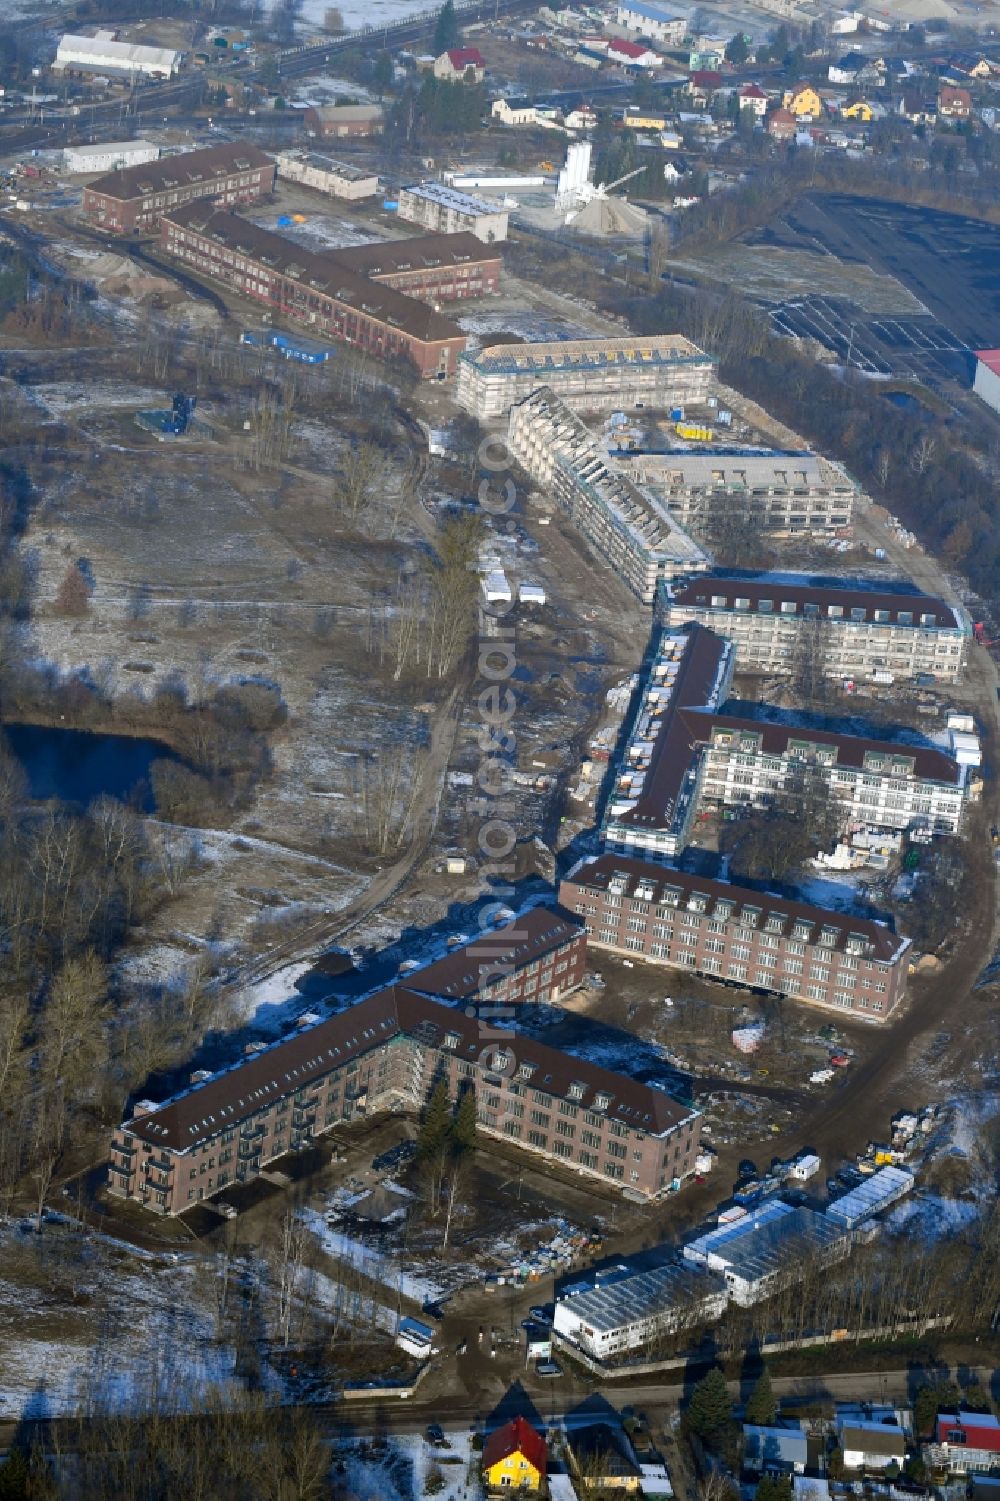 Aerial photograph Bernau - Construction site for the renovation and reconstruction of the building complex of the former military barracks Sanierungsgebiet Panke-Park on Schoenfelder Weg in Bernau in the state Brandenburg, Germany